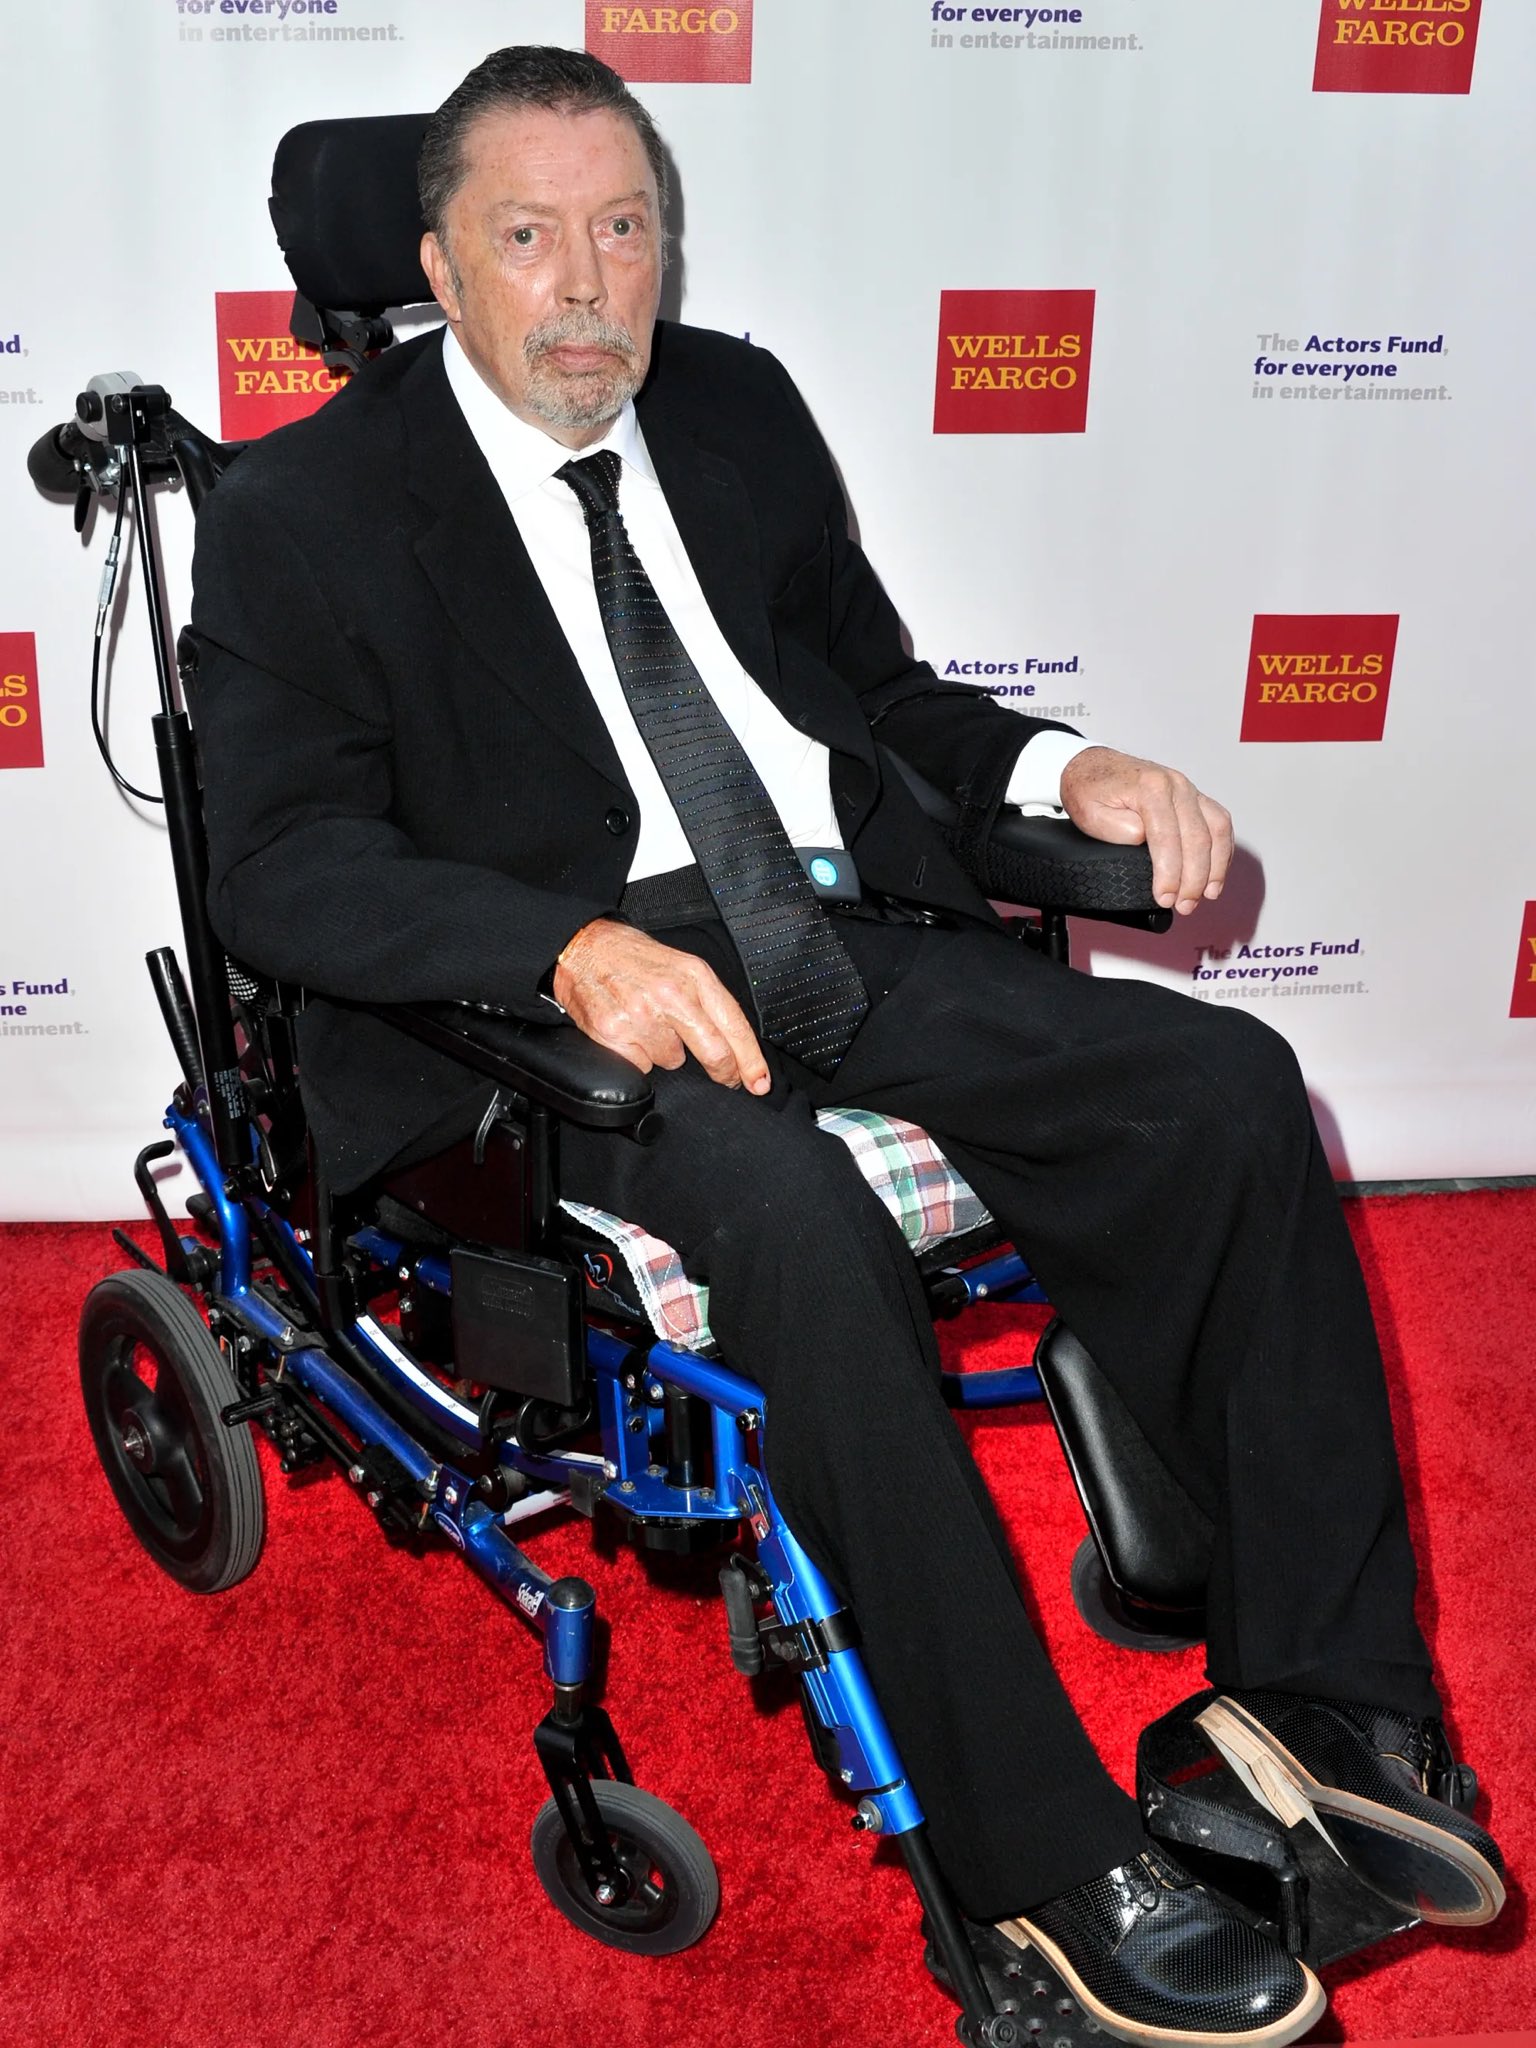 Tim Curry on Twitter: being so dramatic, babe. Don't equate me being in a wheelchair being unable to make my own decisions. It's also incredibly to suggest those around